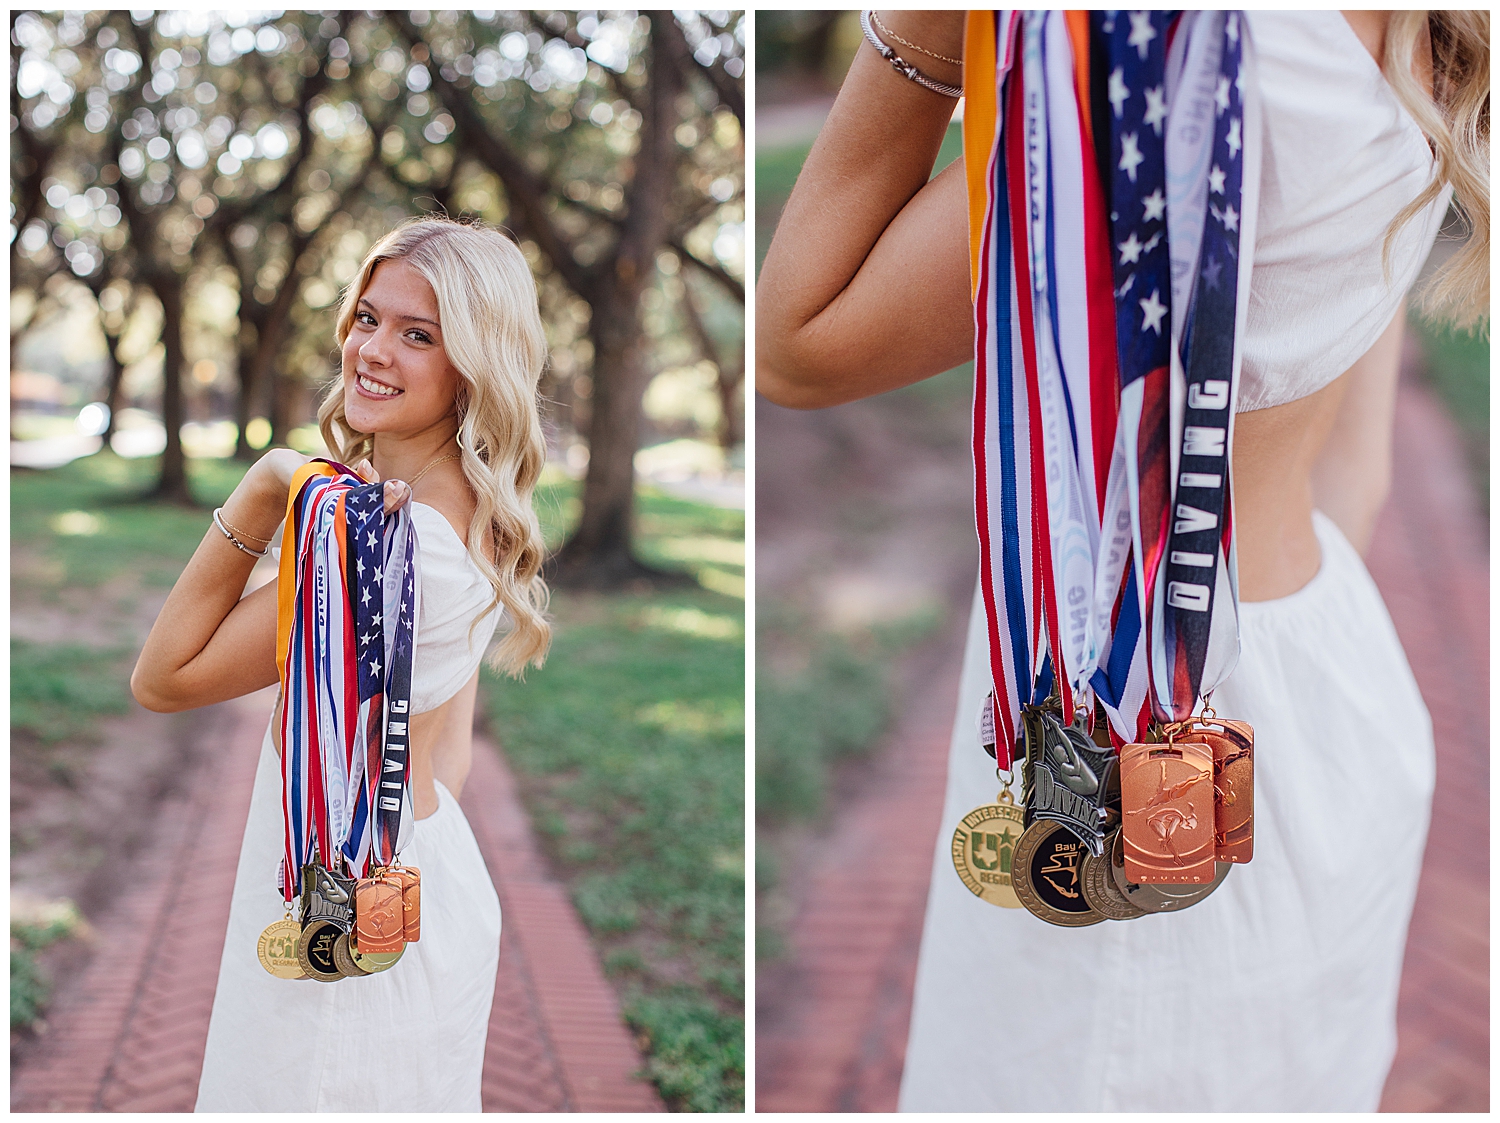 girl in white sundress holding medals over her shoulder on pathway between trees Houston